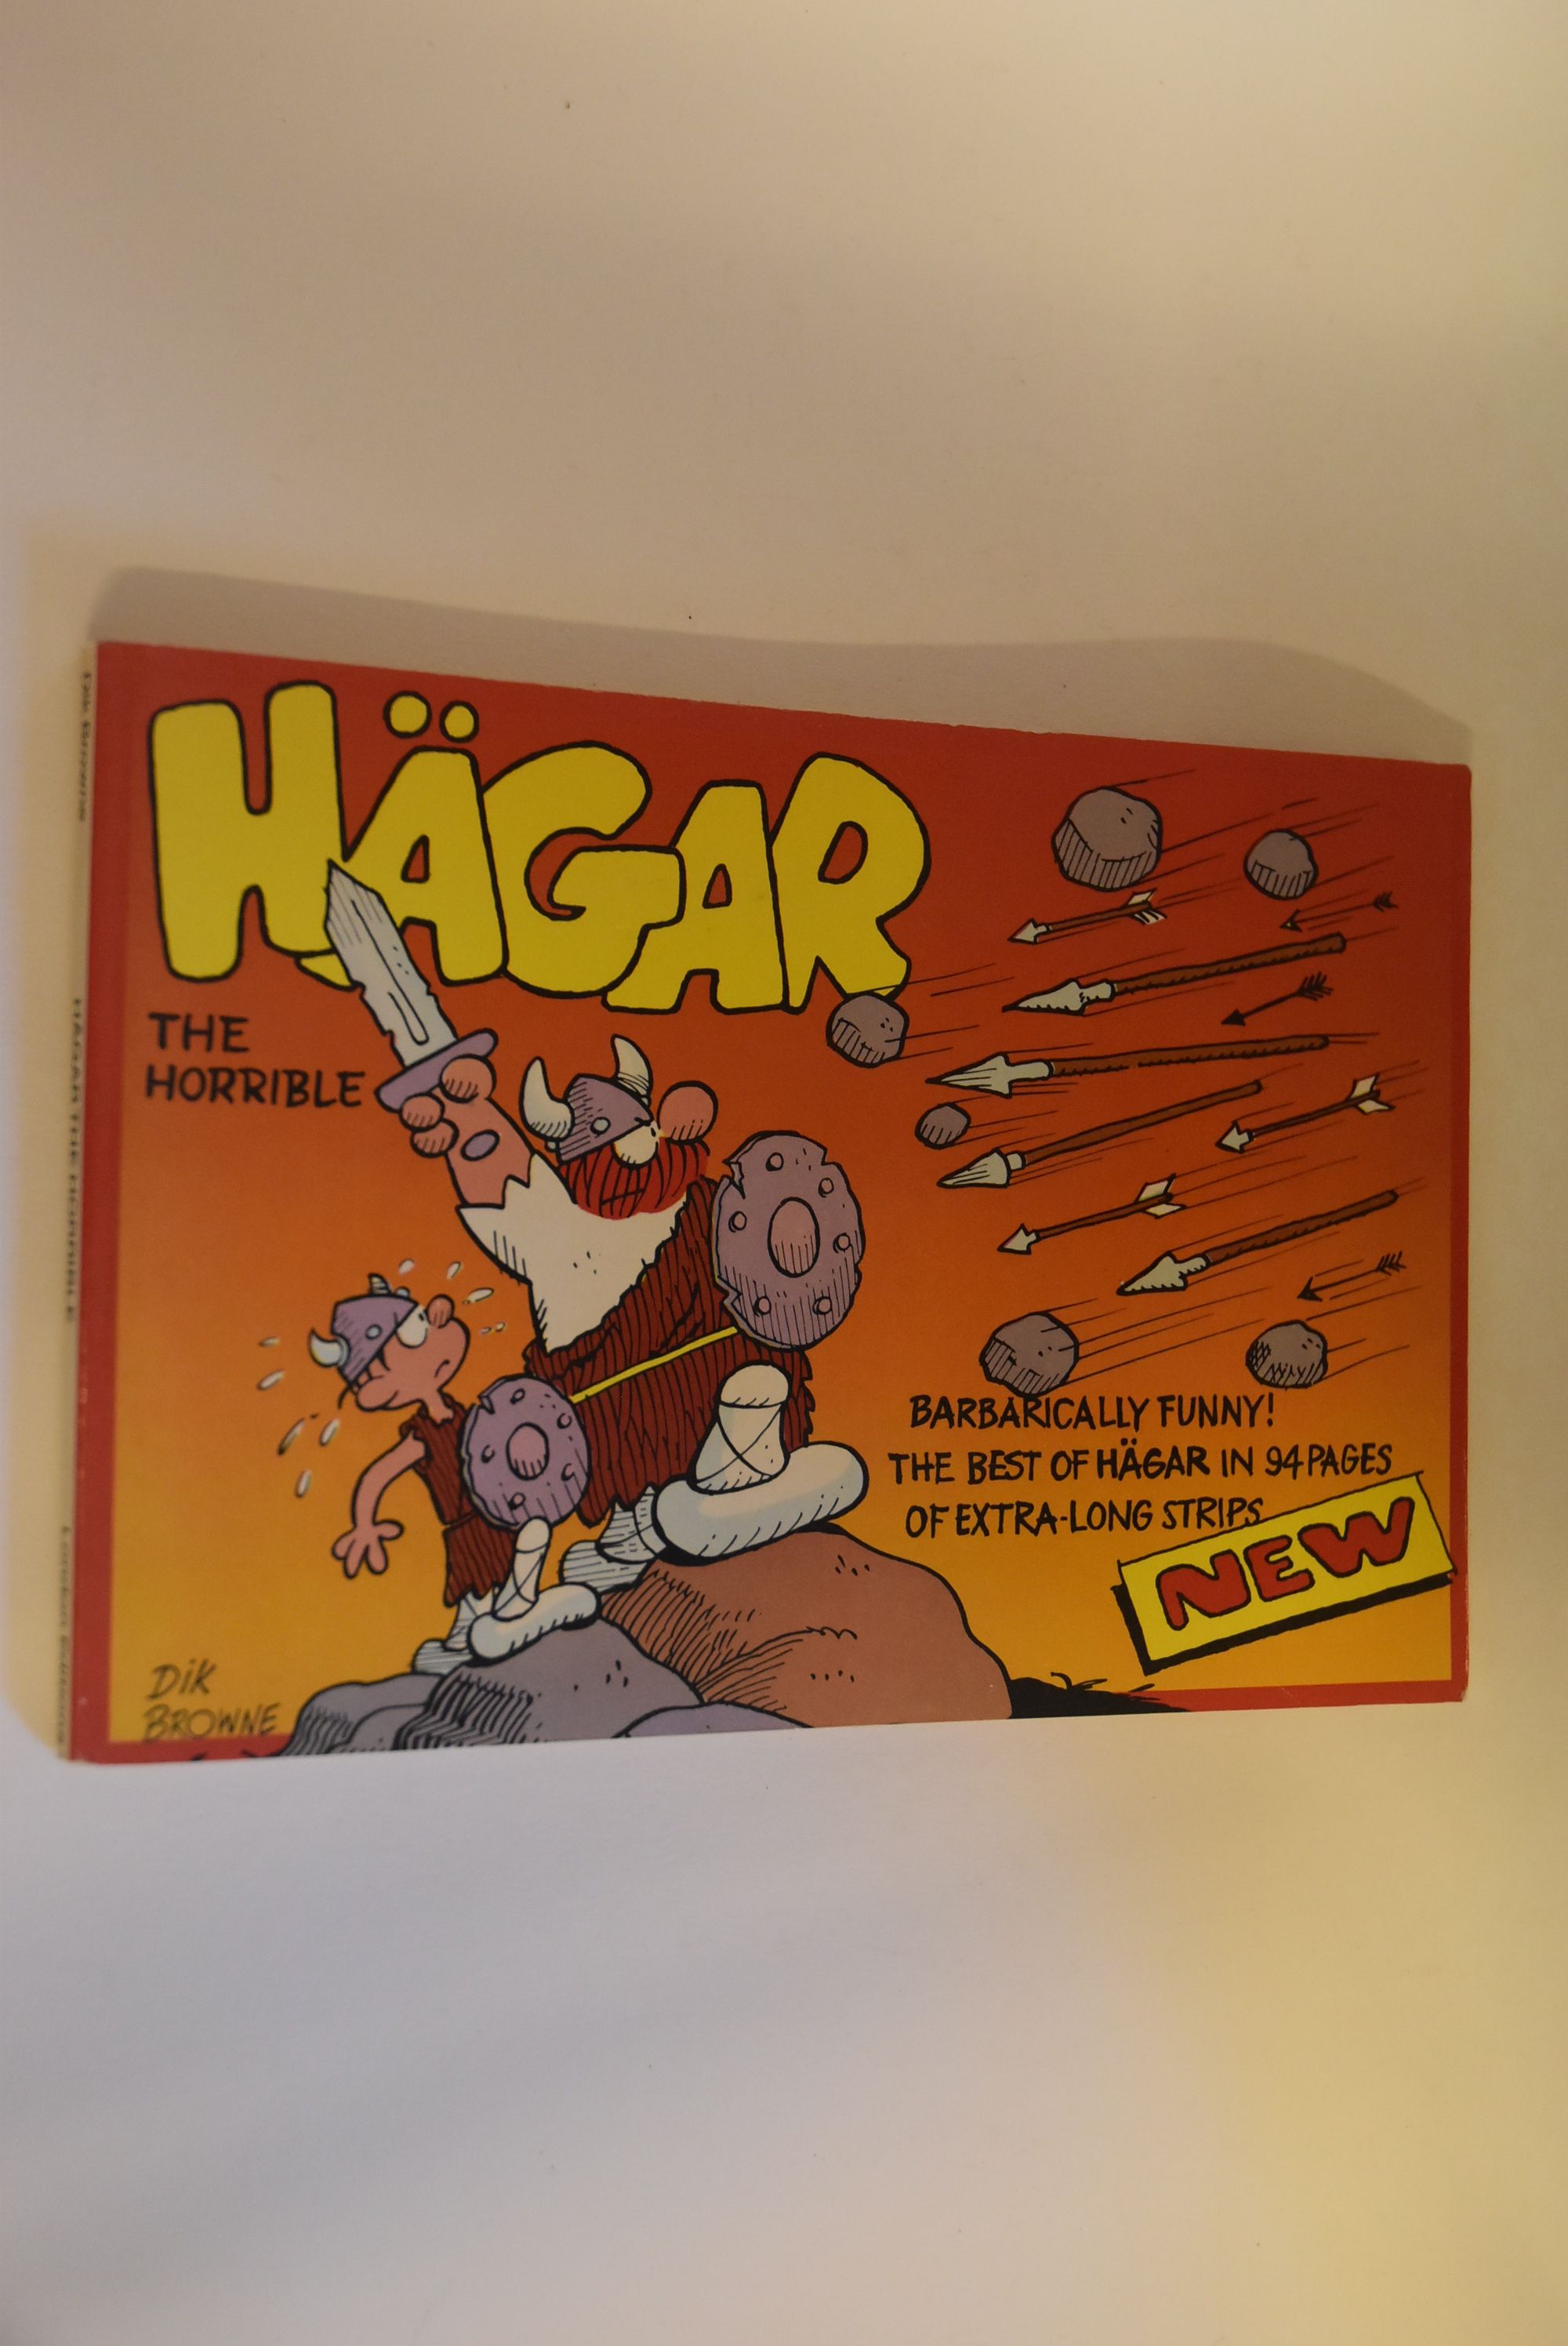 Hägar the Horrible Barbarically Funny! The Best of Hägar in 94 Pages of extra-long Strips - Dik Browne